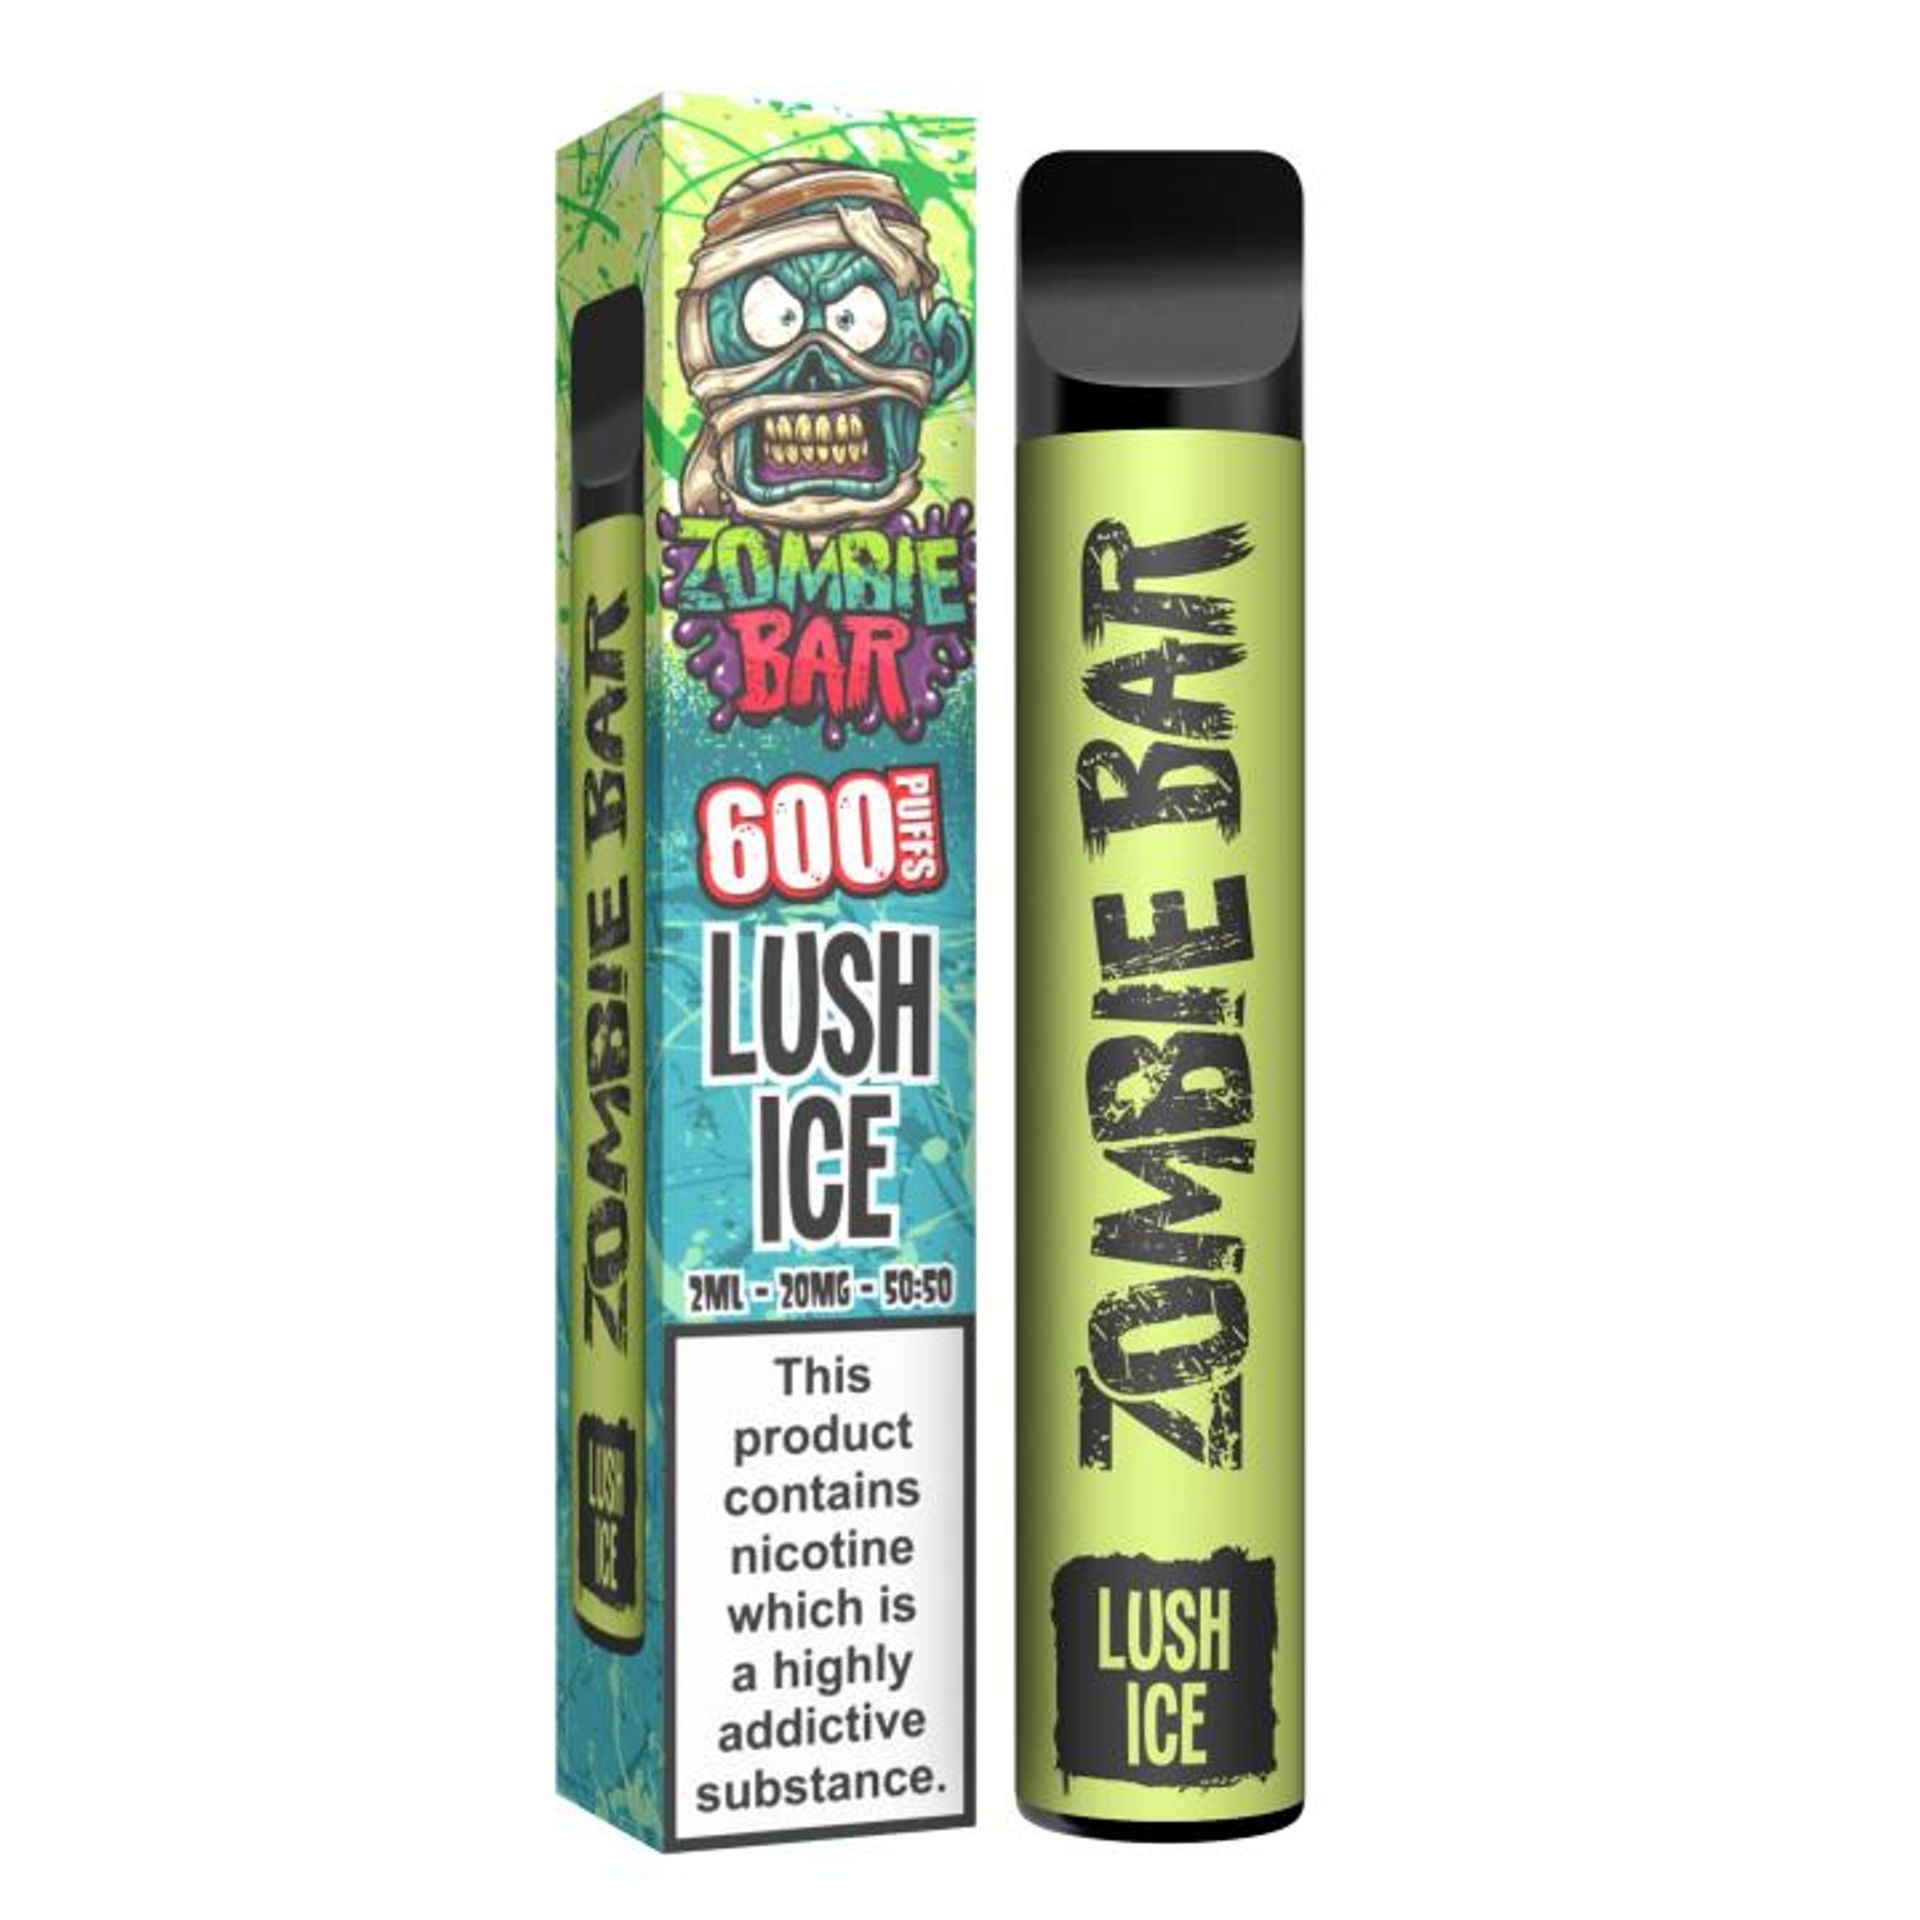 Image of Lush Ice by Zombie Bar